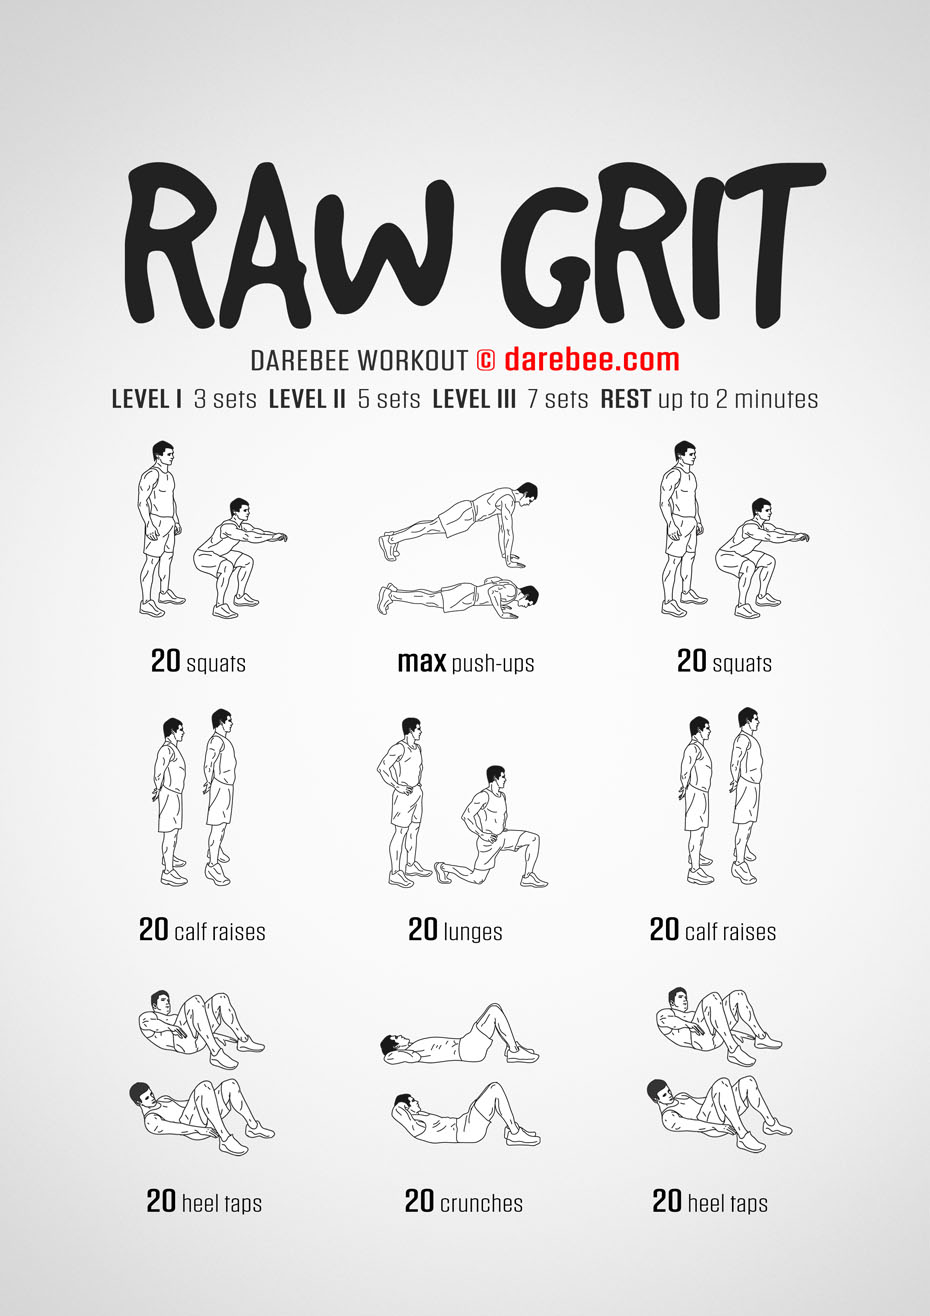 Raw Grit is a DAREBEE home fitness no-equipment strength and tone workout that targets the entire body.